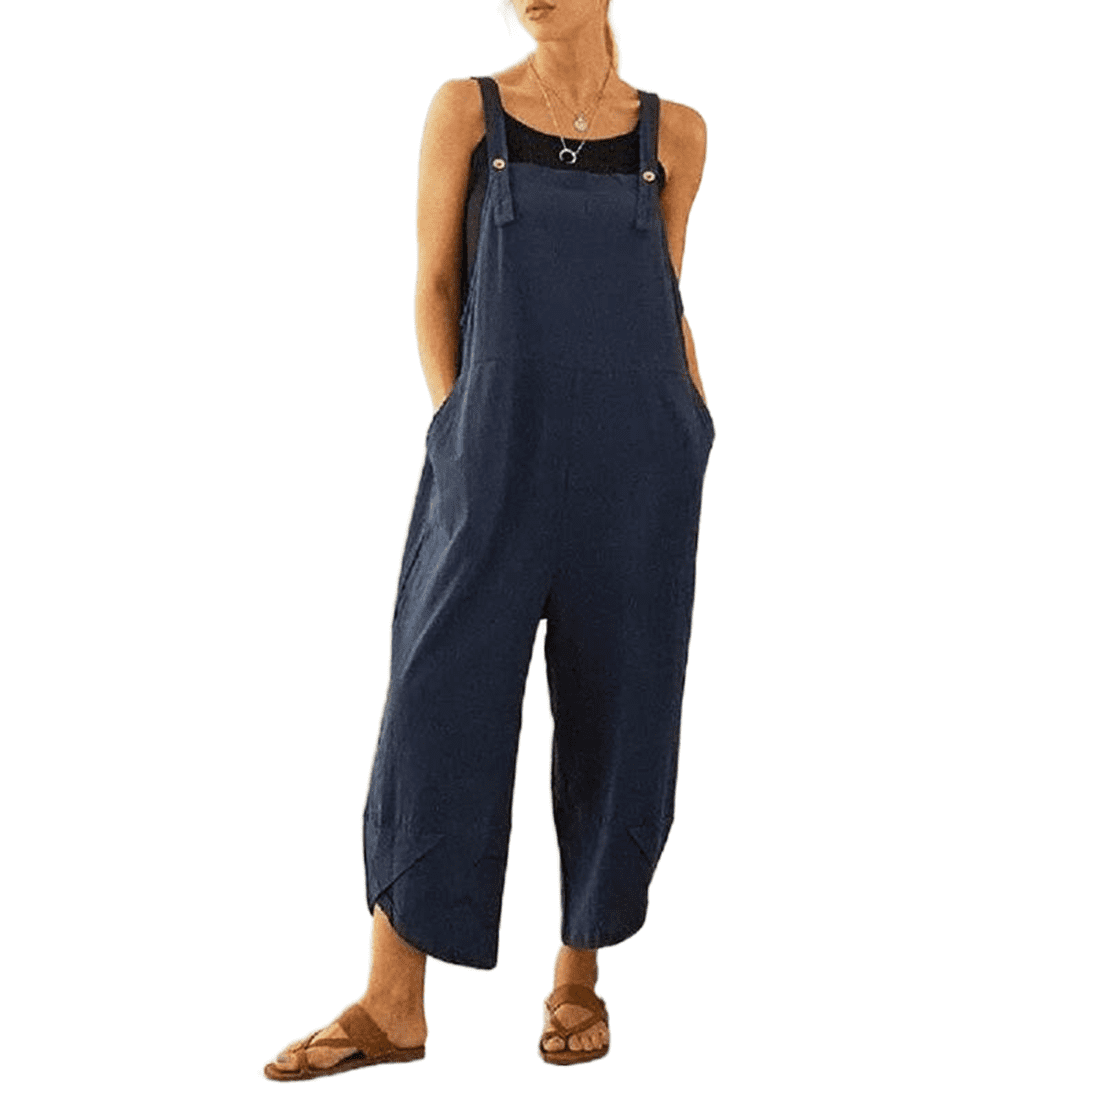 Dungarees Women's Casual Loose Overalls Long Wide Leg Trousers Romper Jumpsuit 